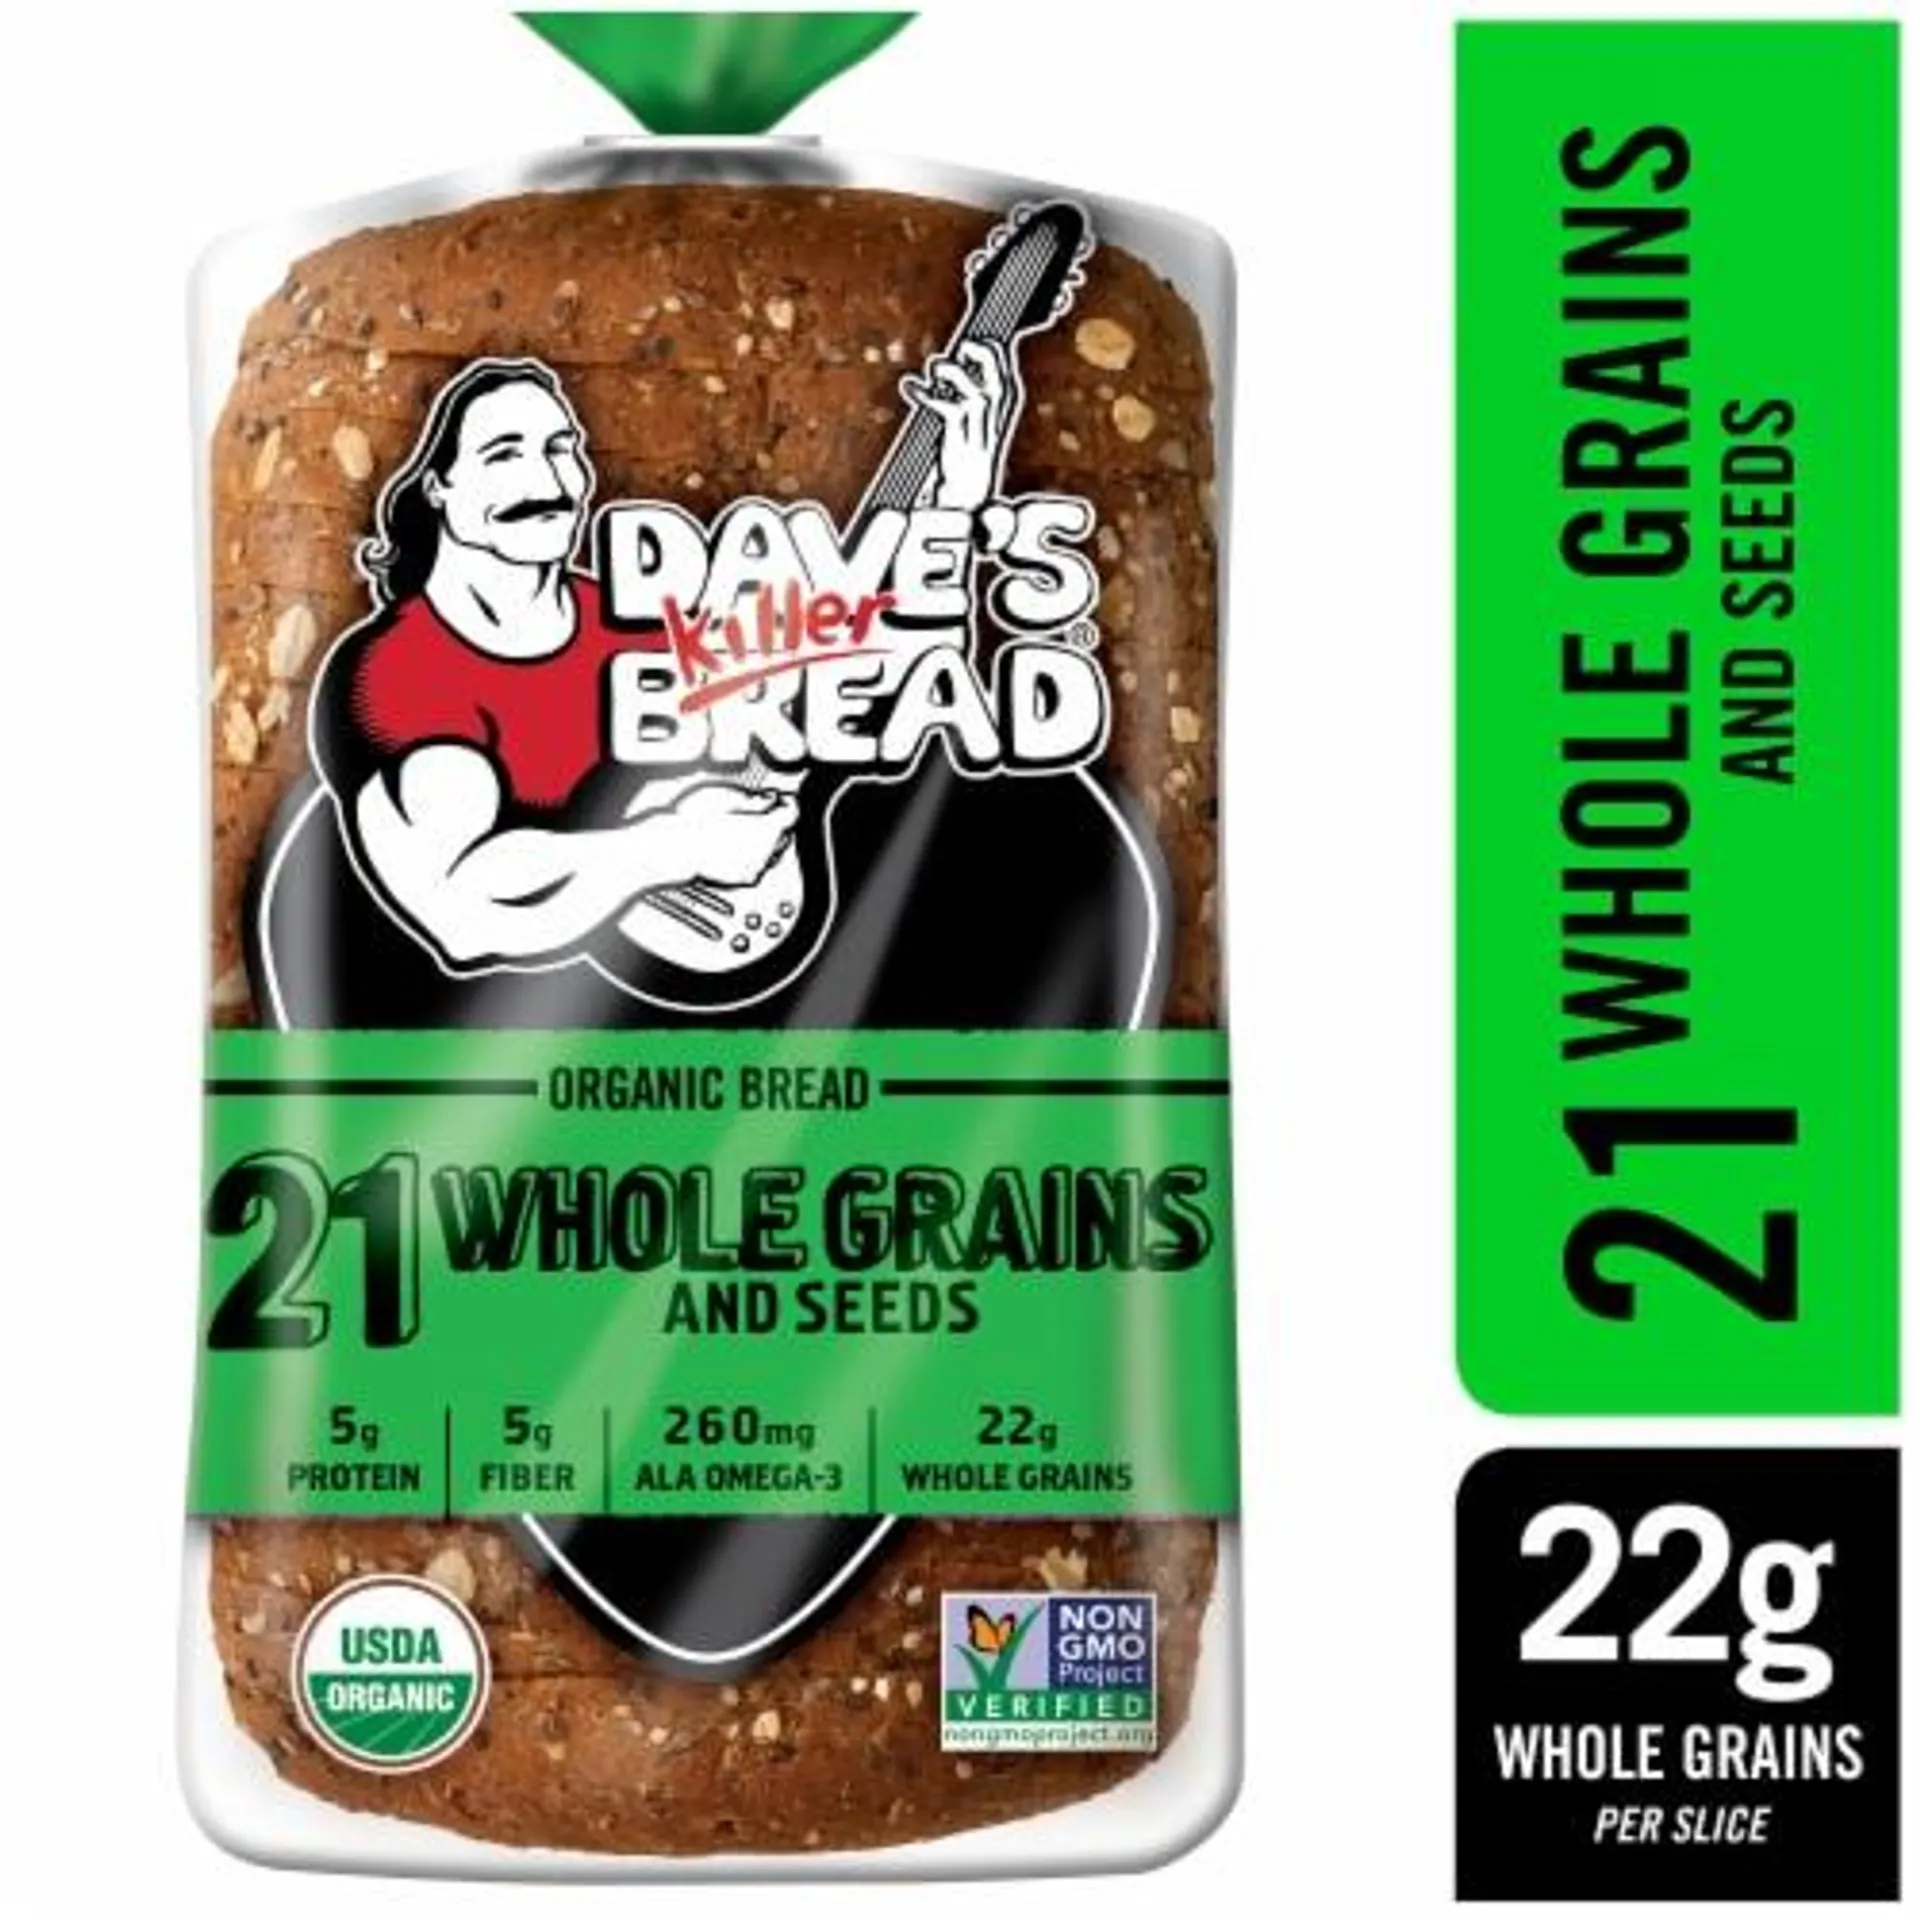 Dave's Killer Bread 21 Whole Grains and Seeds Whole Grain Organic Bread